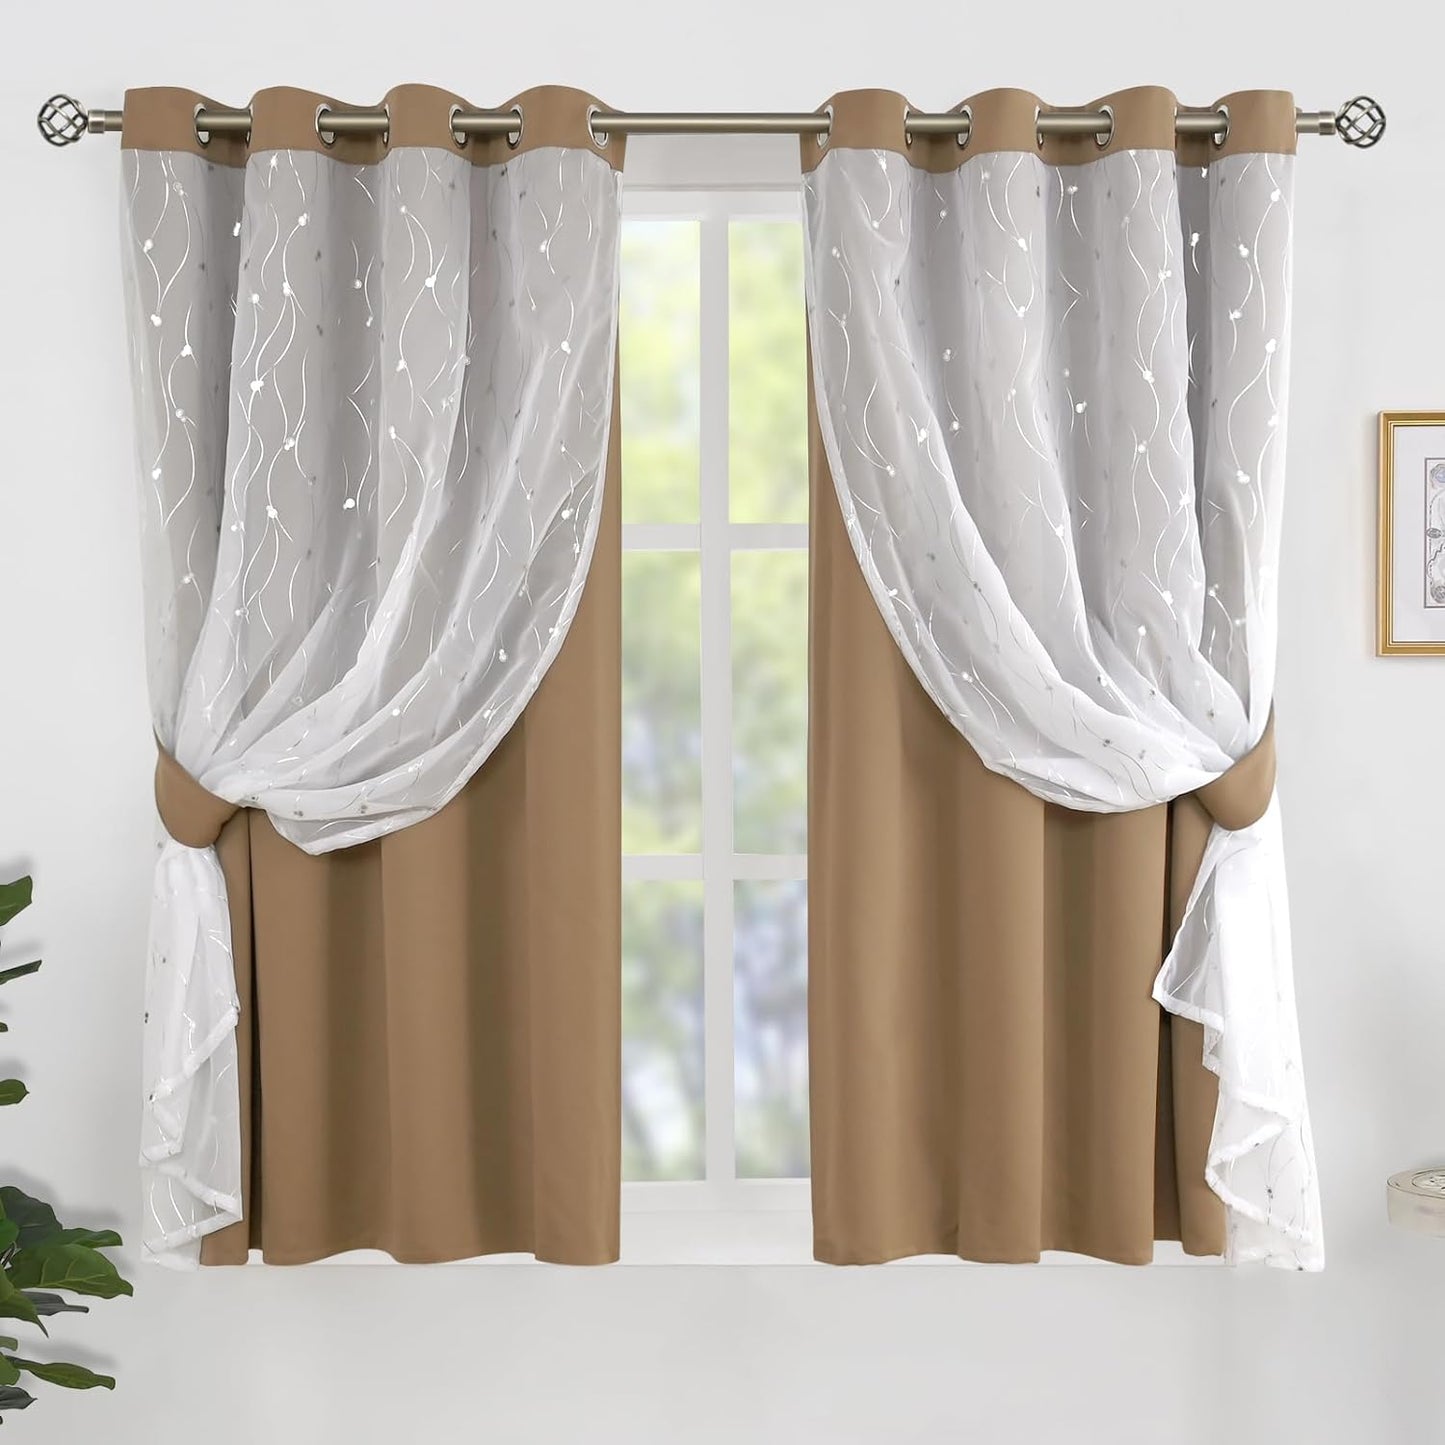 Bgment Grey Blackout Curtains with Sheer Overlay 84 Inches Long，Double Layer Silver Printed Kids Curtains Grommet Thermal Insulated Window Drapes for Living Room, 2 Panel, 52 X 84, Dark Grey  BGment Taupe 52W X 63L 